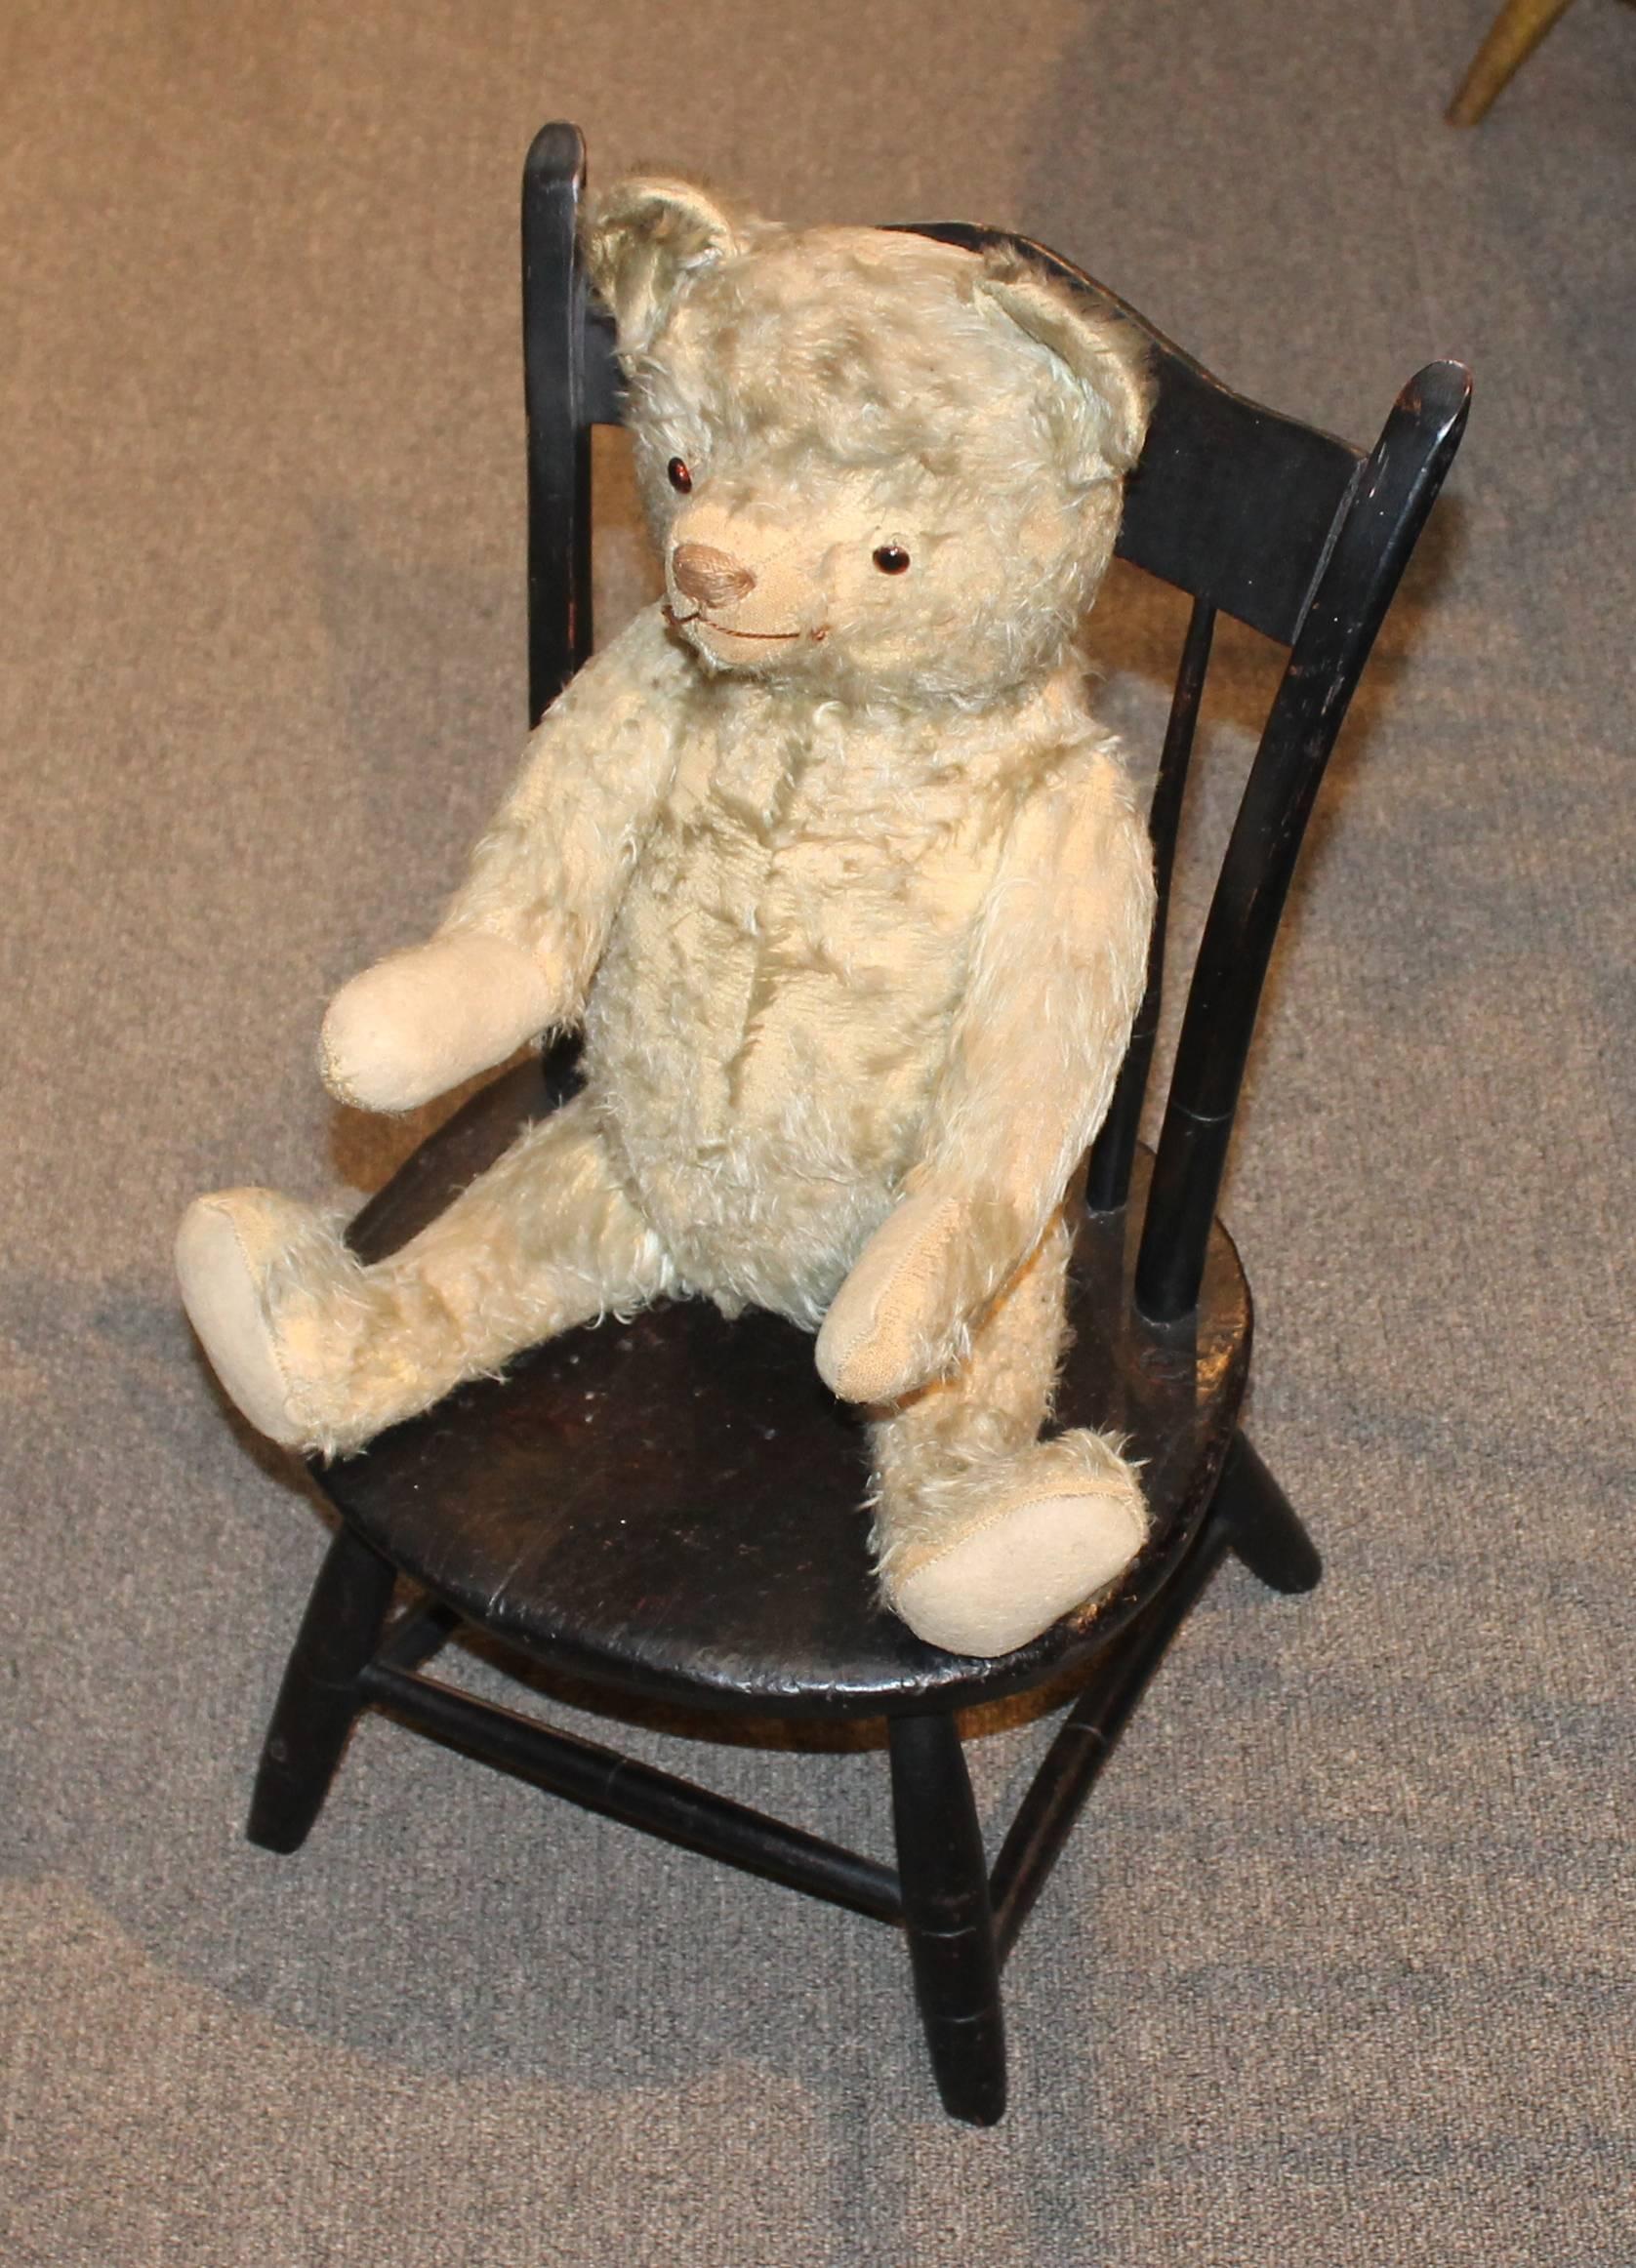 This fun and worn bear is in good condition and has been well loved. It is all jointed and glass eyes. It looks like a Steiff but has no button. The mohair coat and body is in good condition.